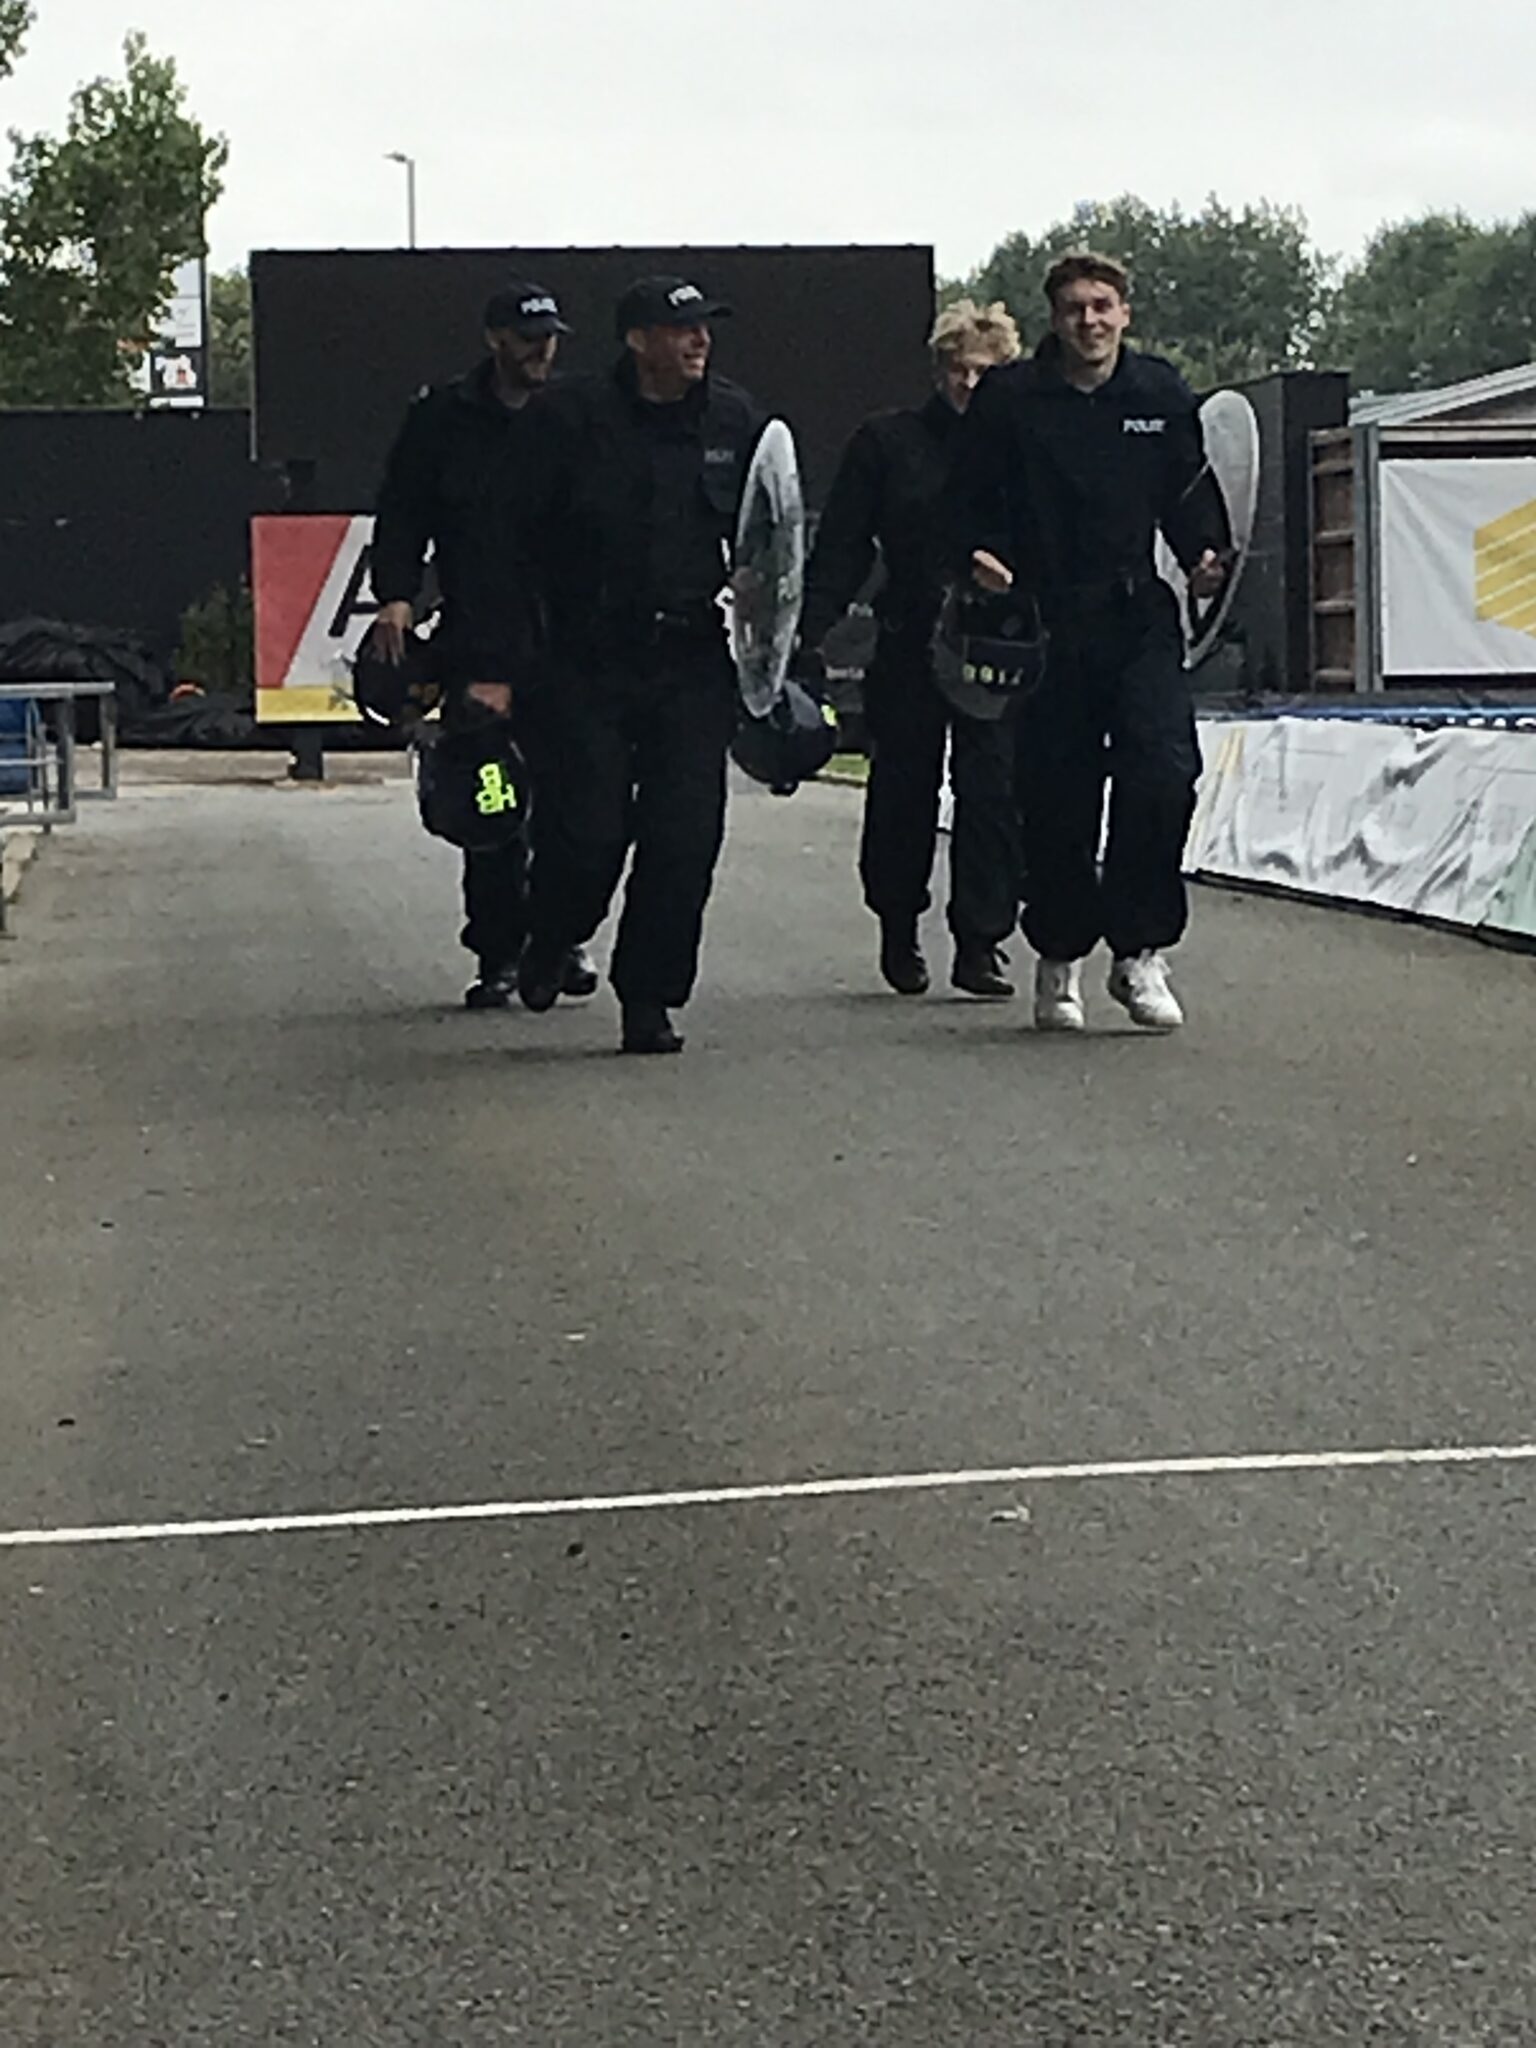 The group of 4 TVP approaching the finish line after running a mile